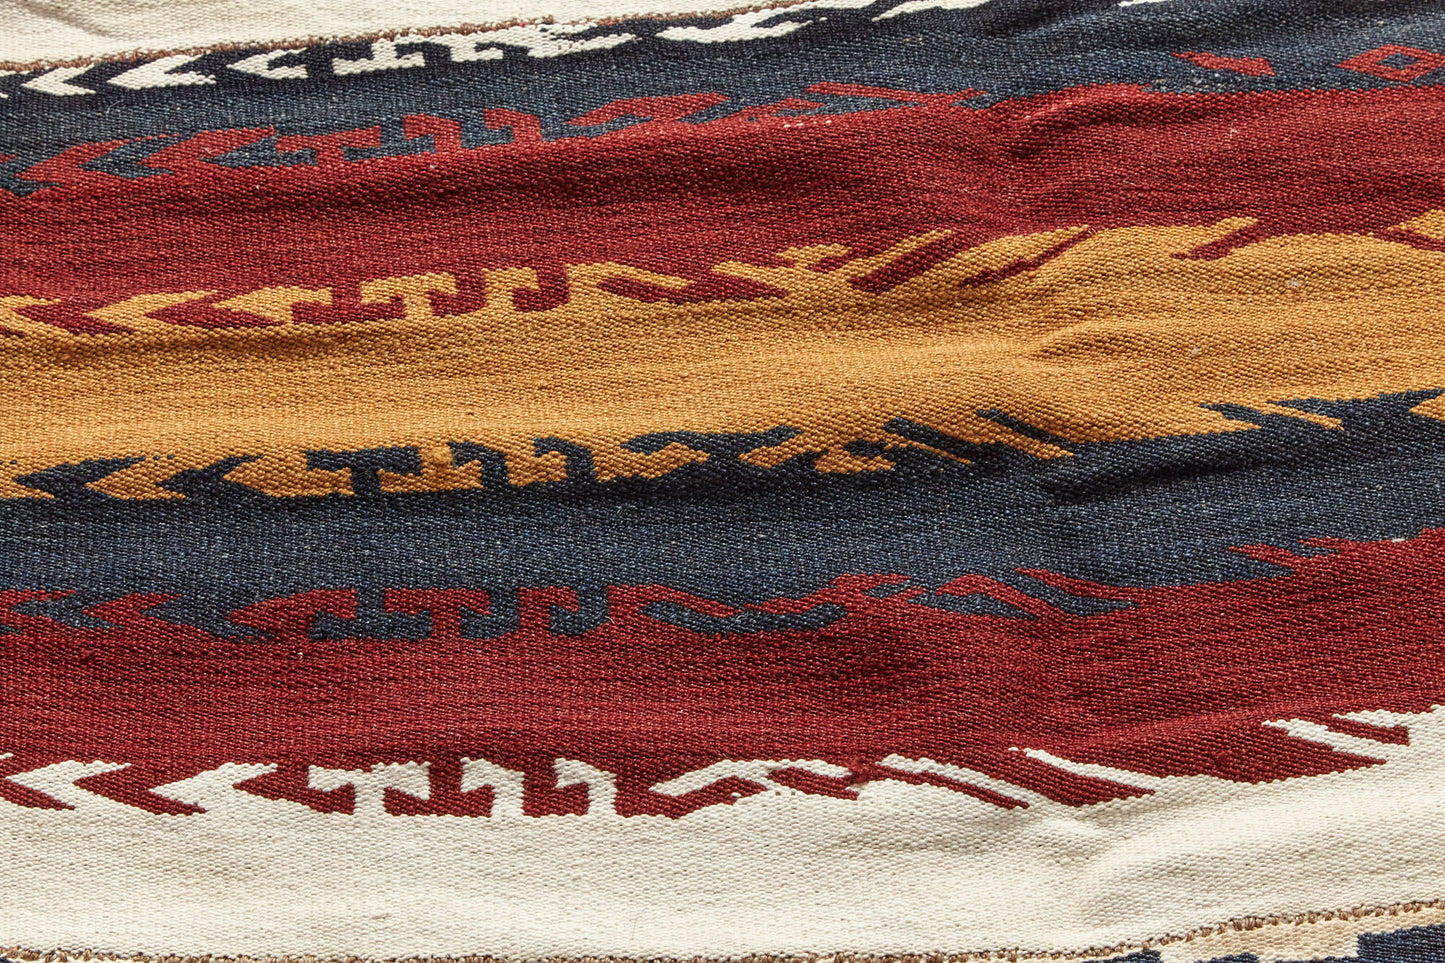 Detail of antique Kilim Turkish rug with red, grey, gold and cream stripes. Hand woven piece, perfect for a living room, bedroom or kitchen - Available from King Kennedy Rugs Los Angeles